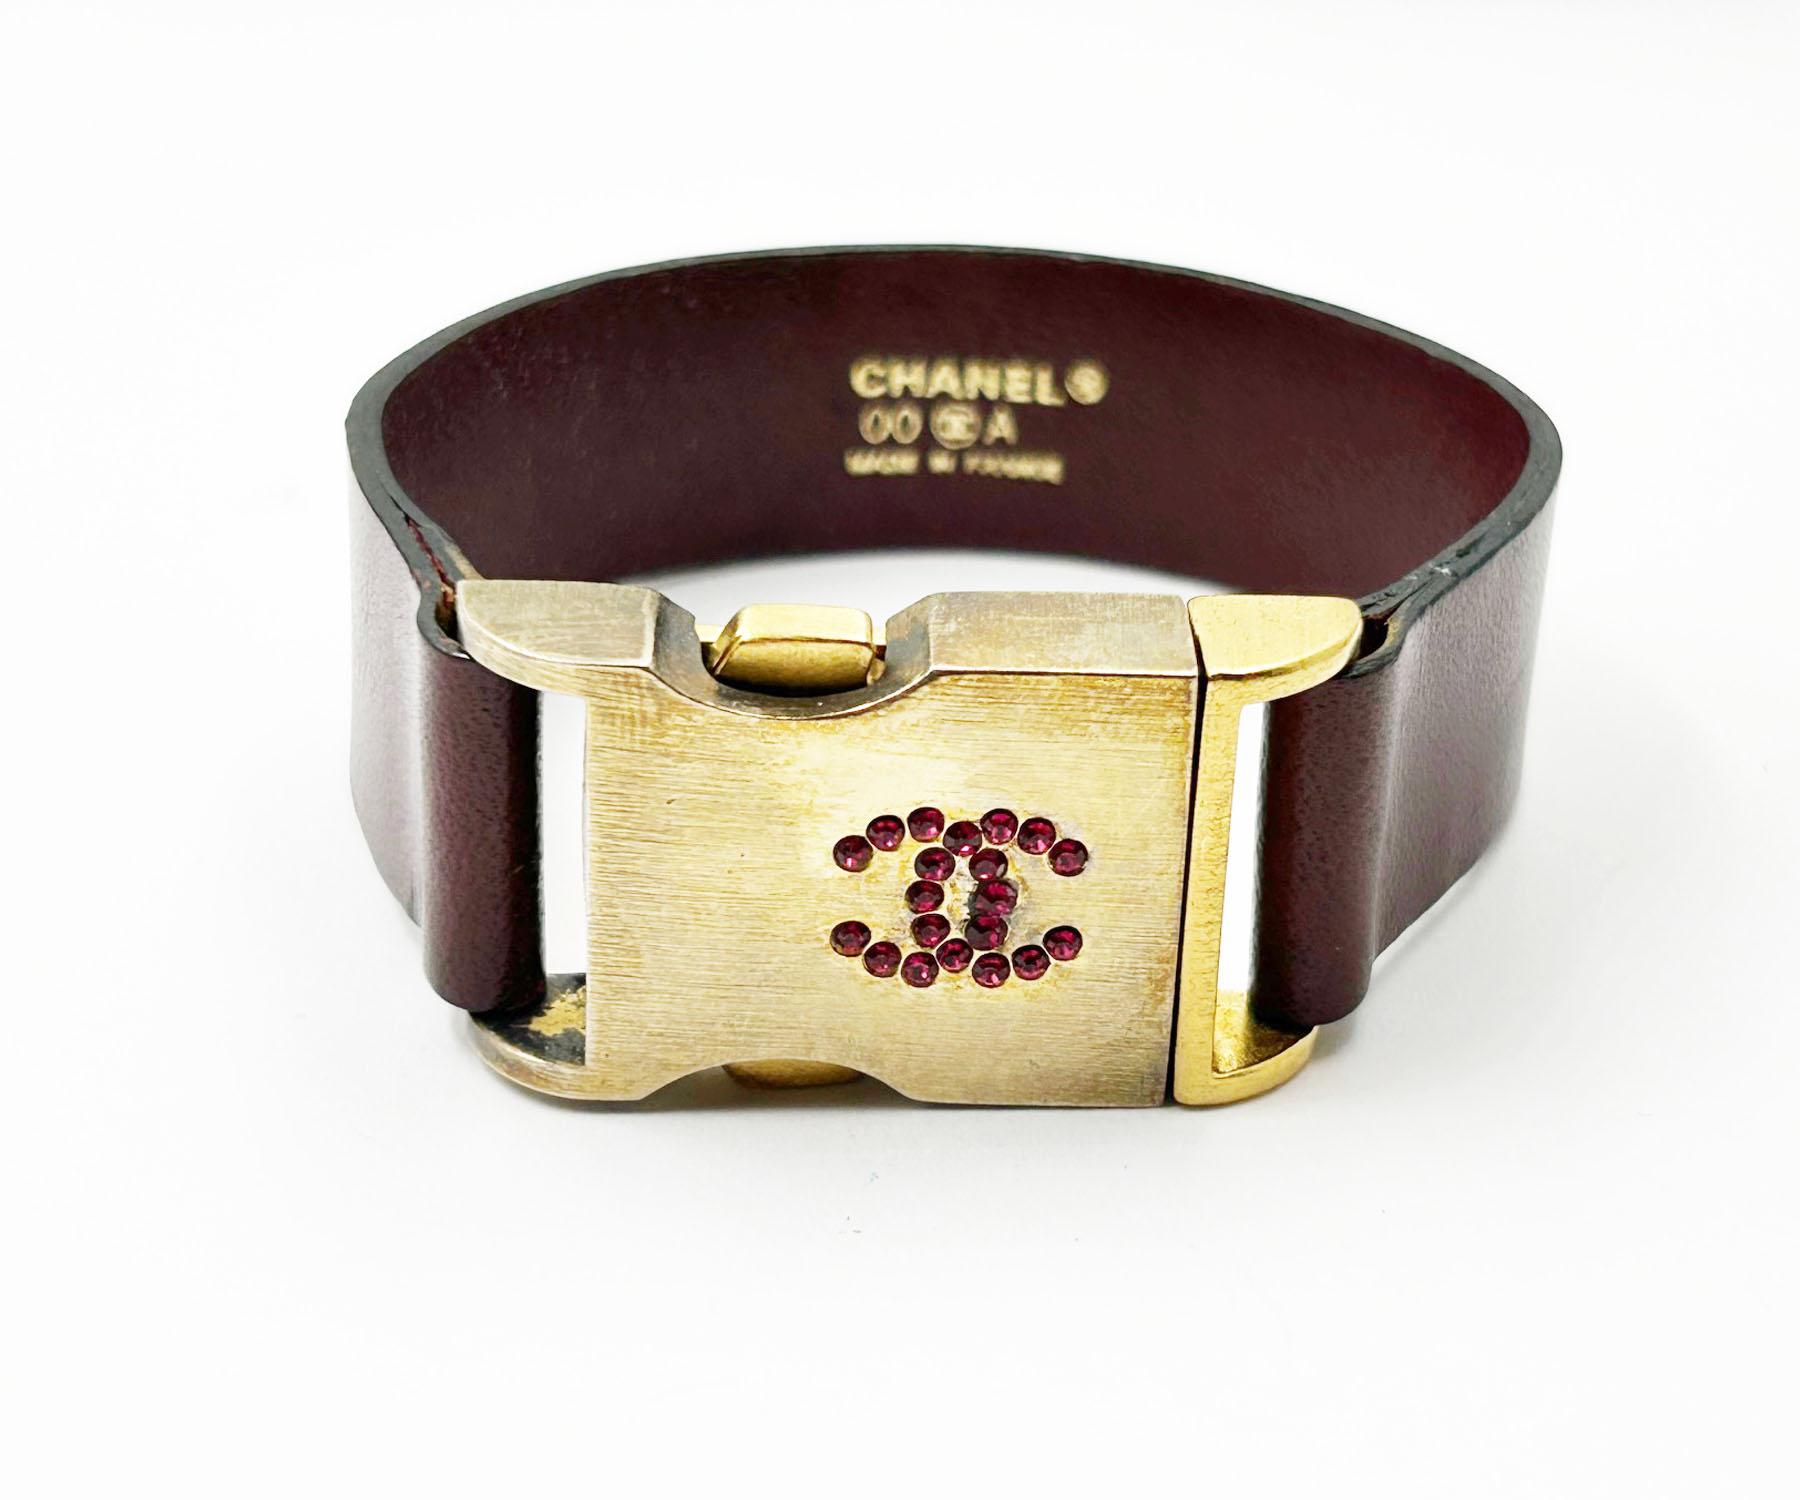 Chanel Vintage Red Crystal Gold Buckle Leather Belt Bracelet 

*Marked 00
*Made in France

-Cuff size is approximately 0.9